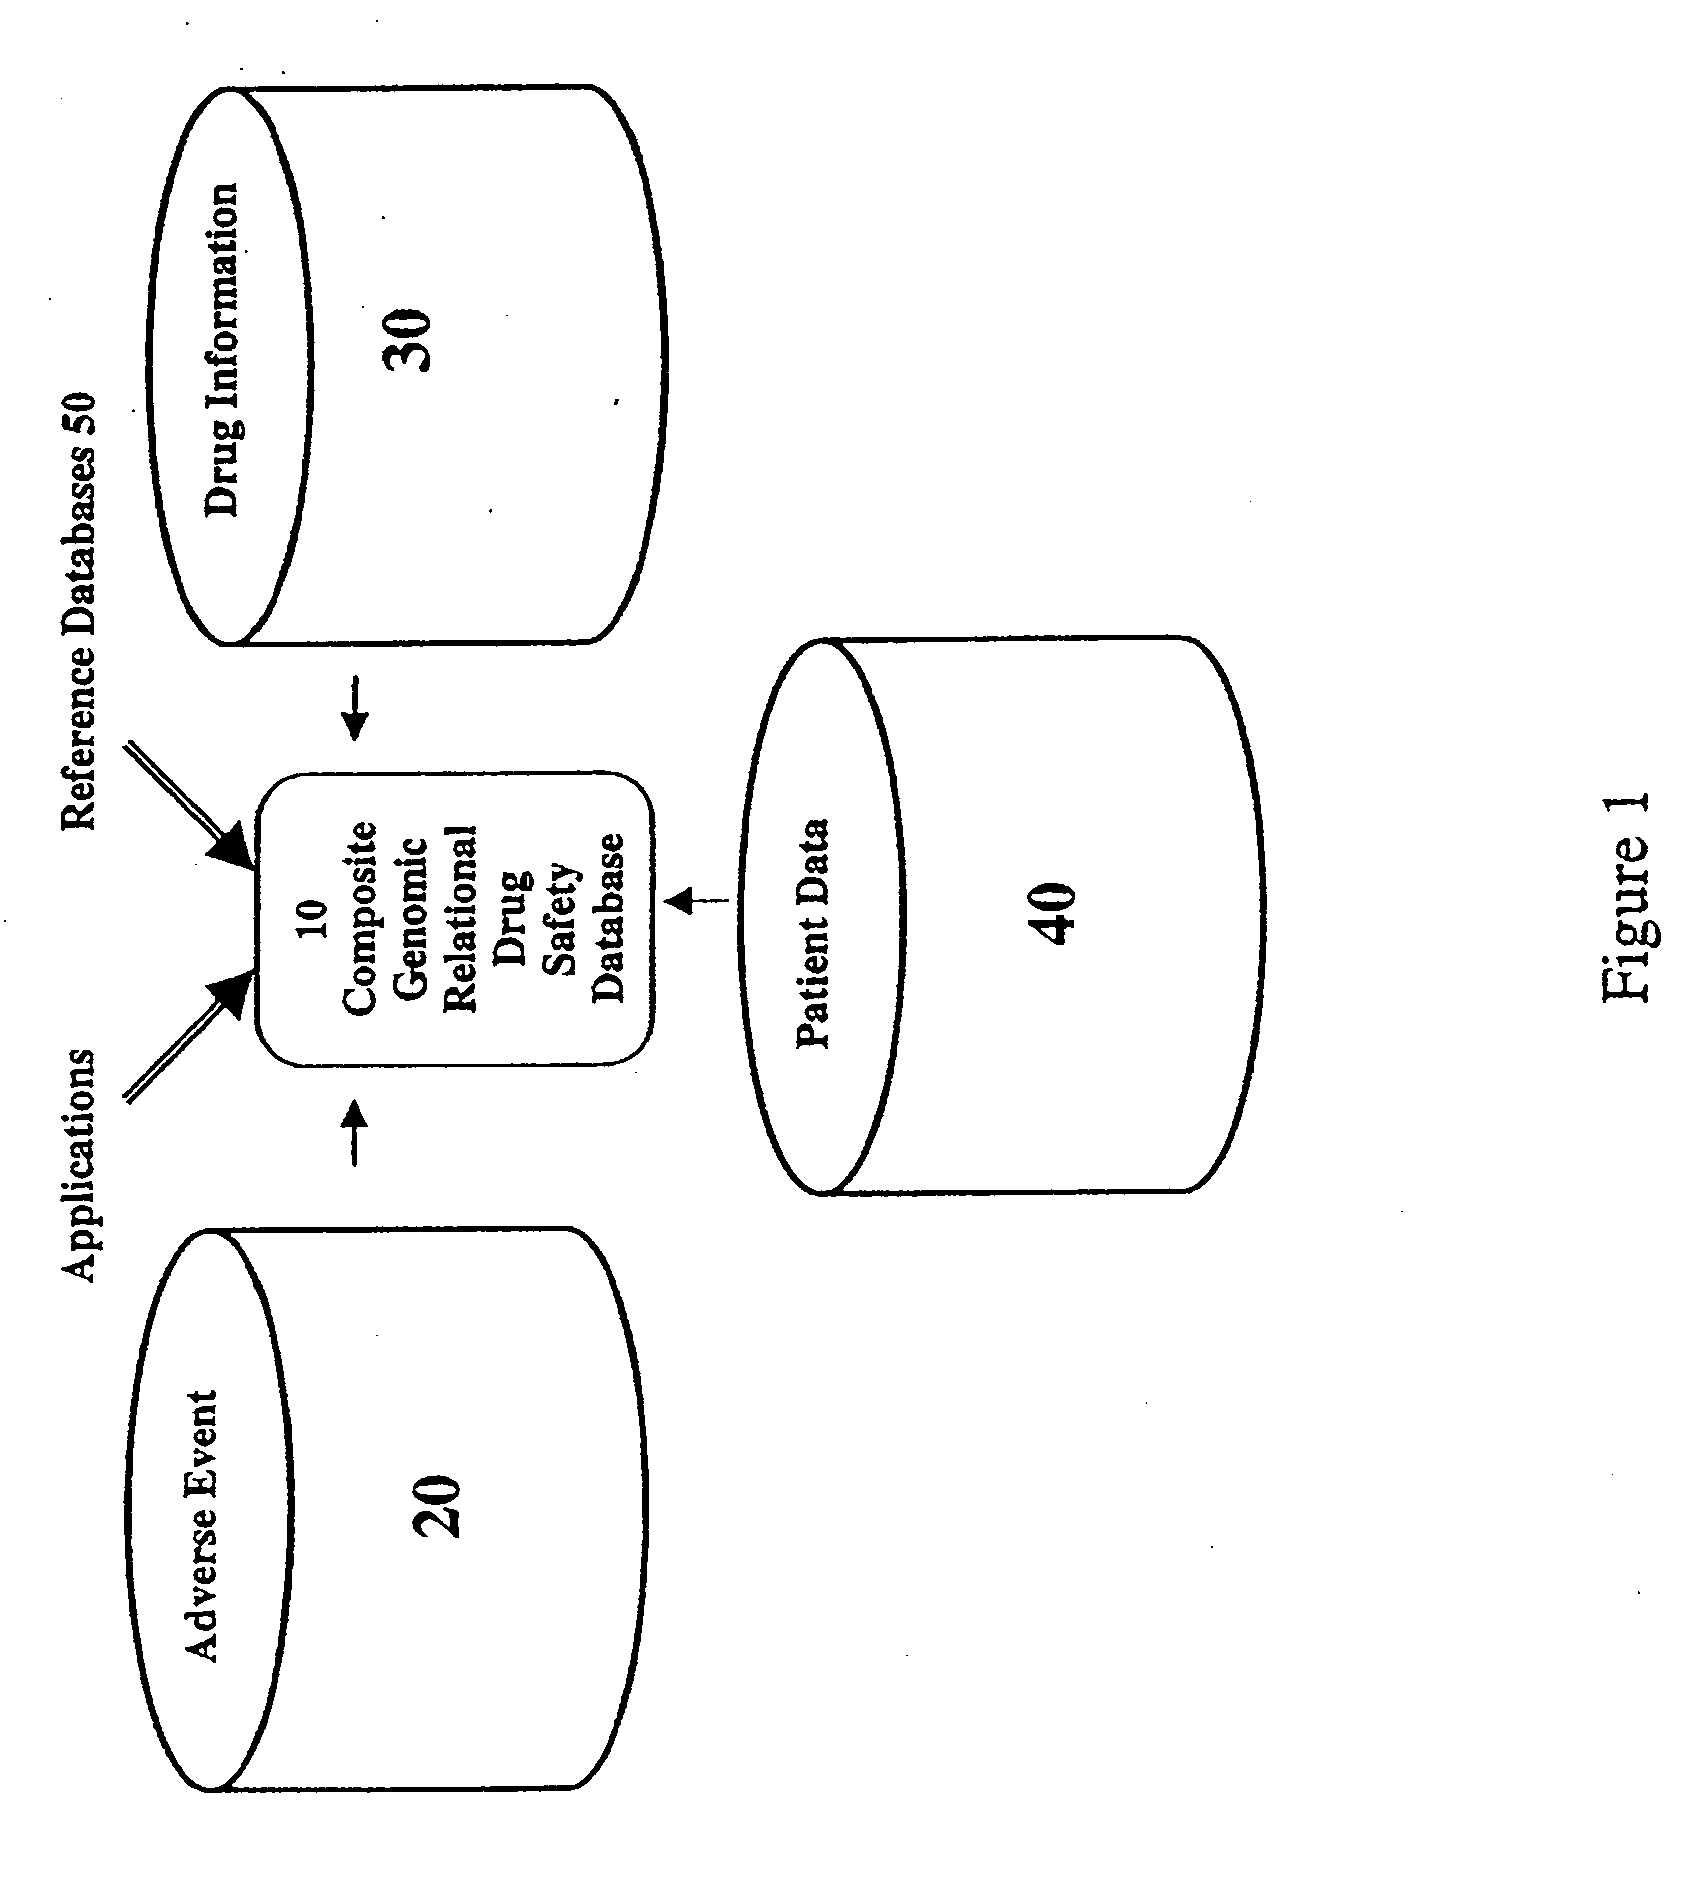 Method and system for the analysis and association of patient-specific and population-based genomic data with drug safety adverse event data